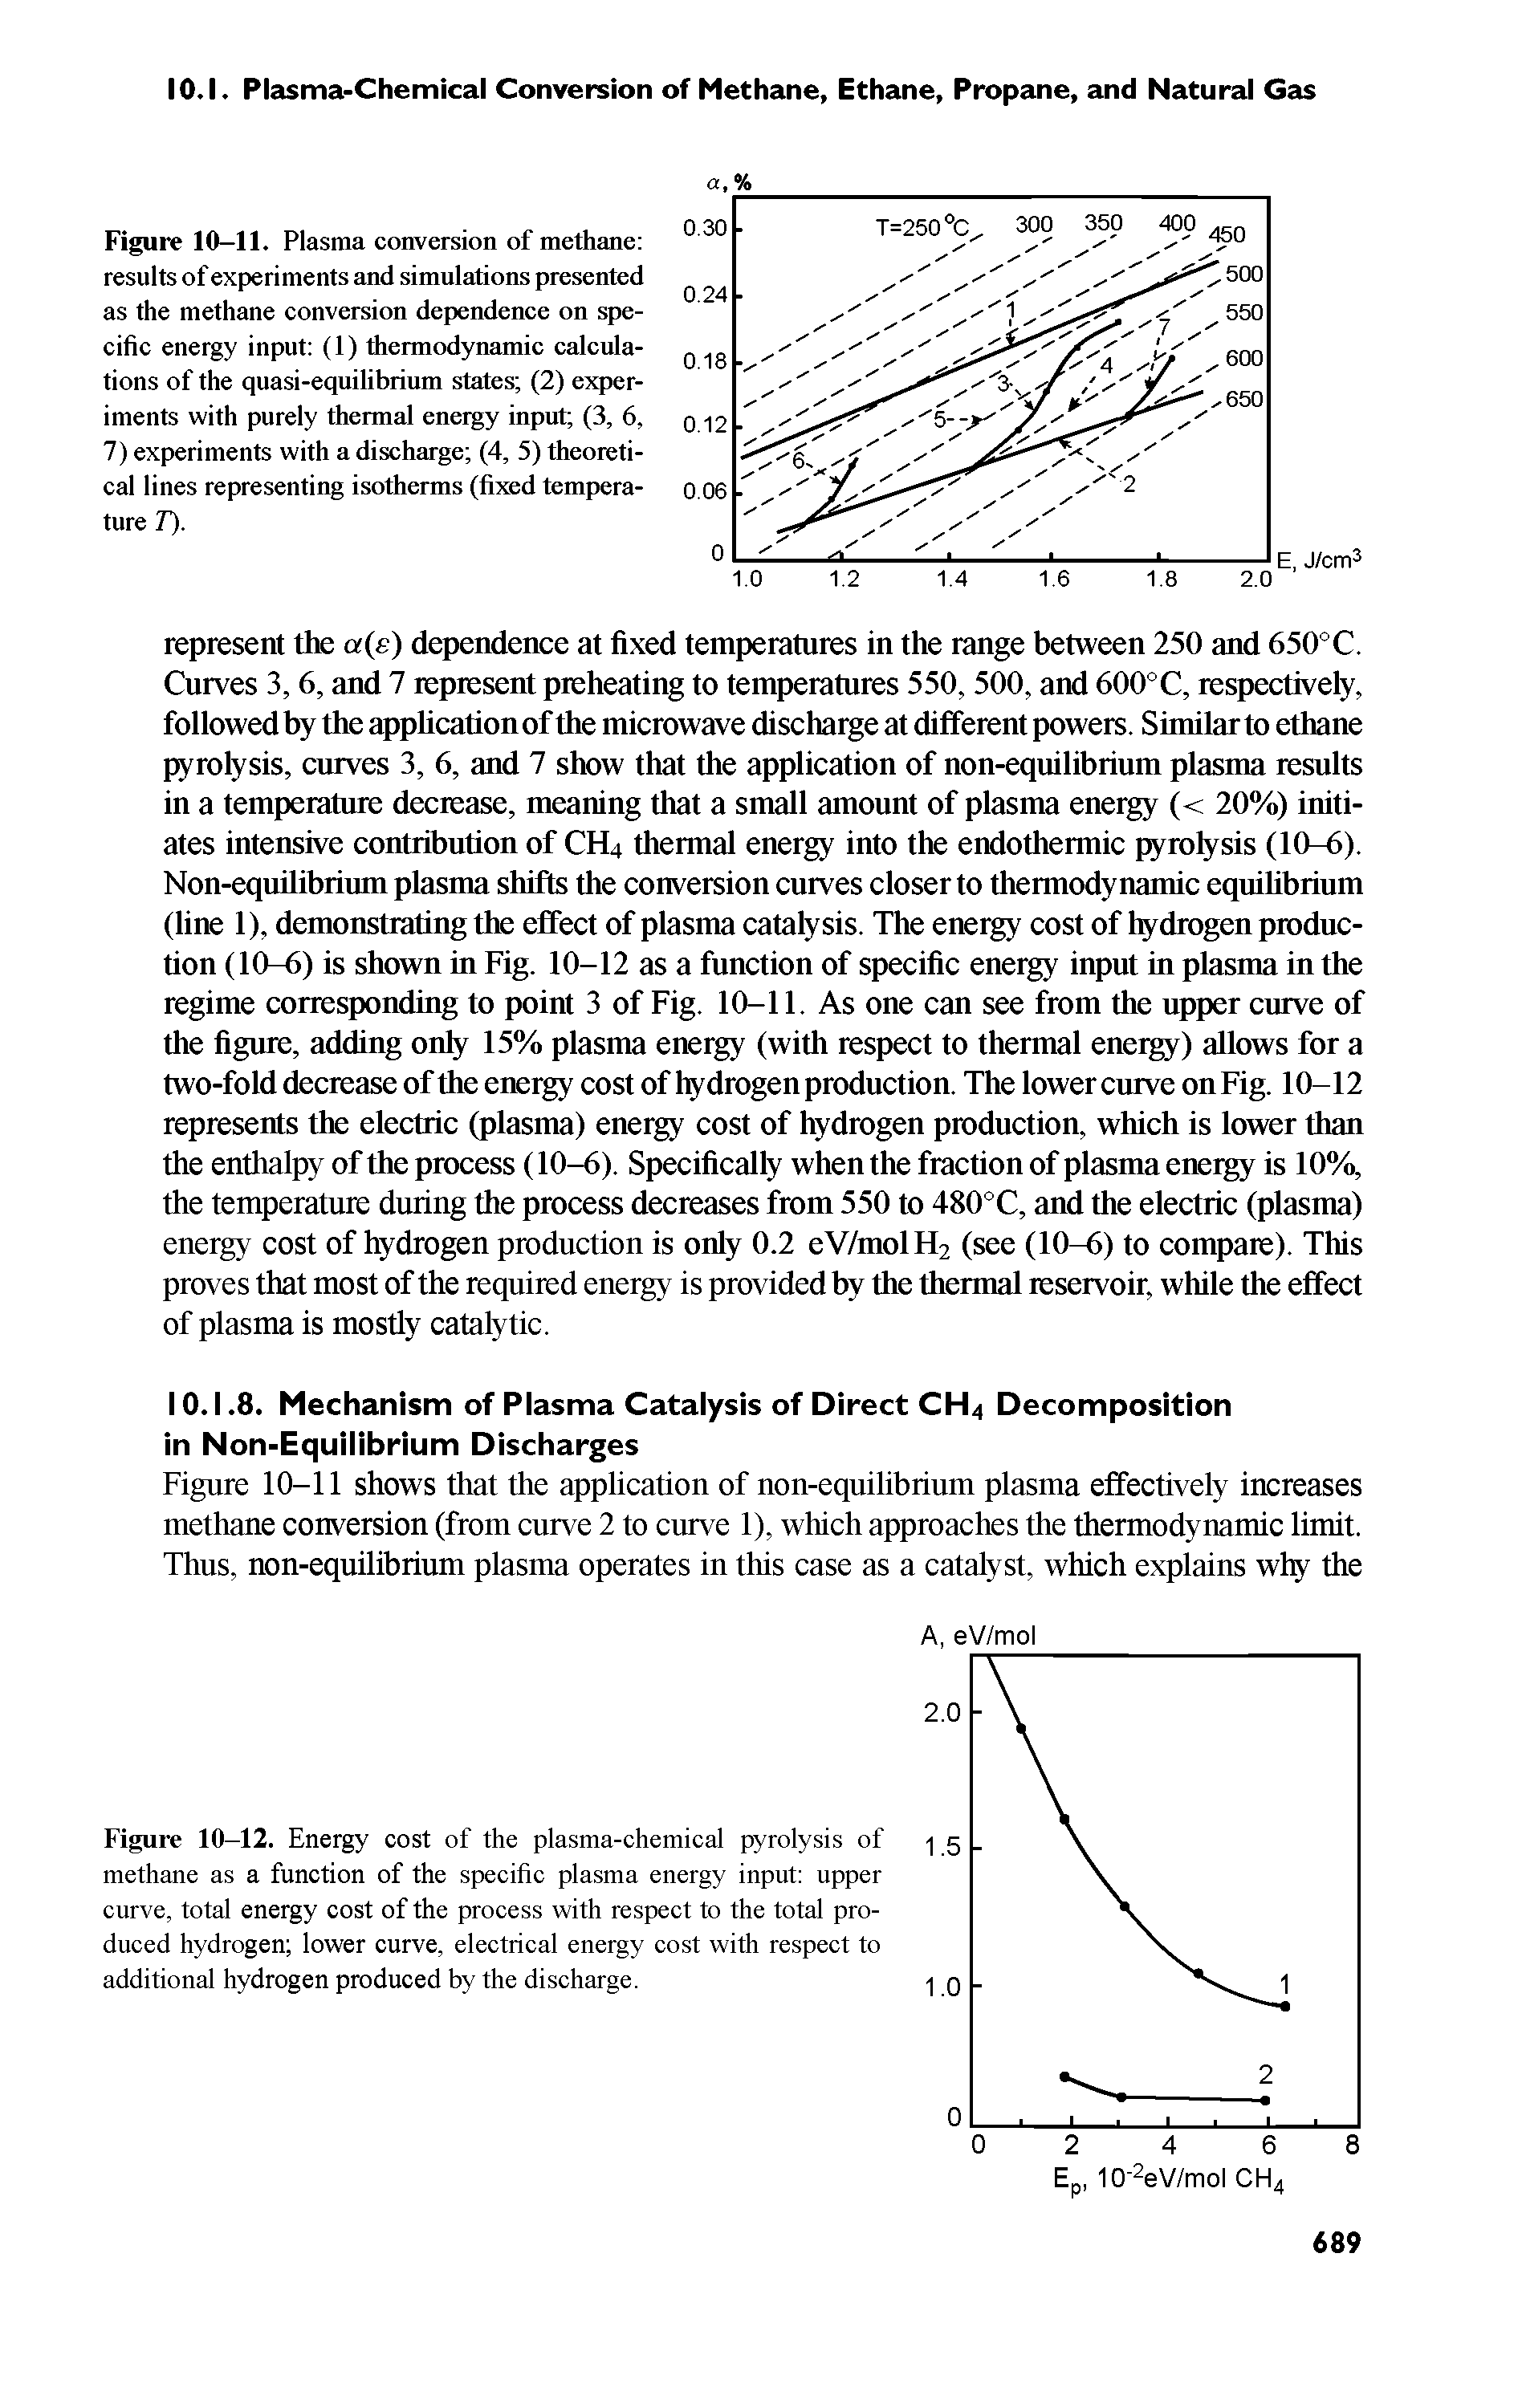 Figure 10-11. Plasma conversion of methane results of experiments and simulations presented as the methane conversion dependence on specific energy input (1) thermodynamic calculations of the quasi-equilibrium states (2) experiments with purely thermal energy input (3, 6, 7) experiments with a discharge (4, 5) theoretical lines representing isotherms (fixed temperature 7).